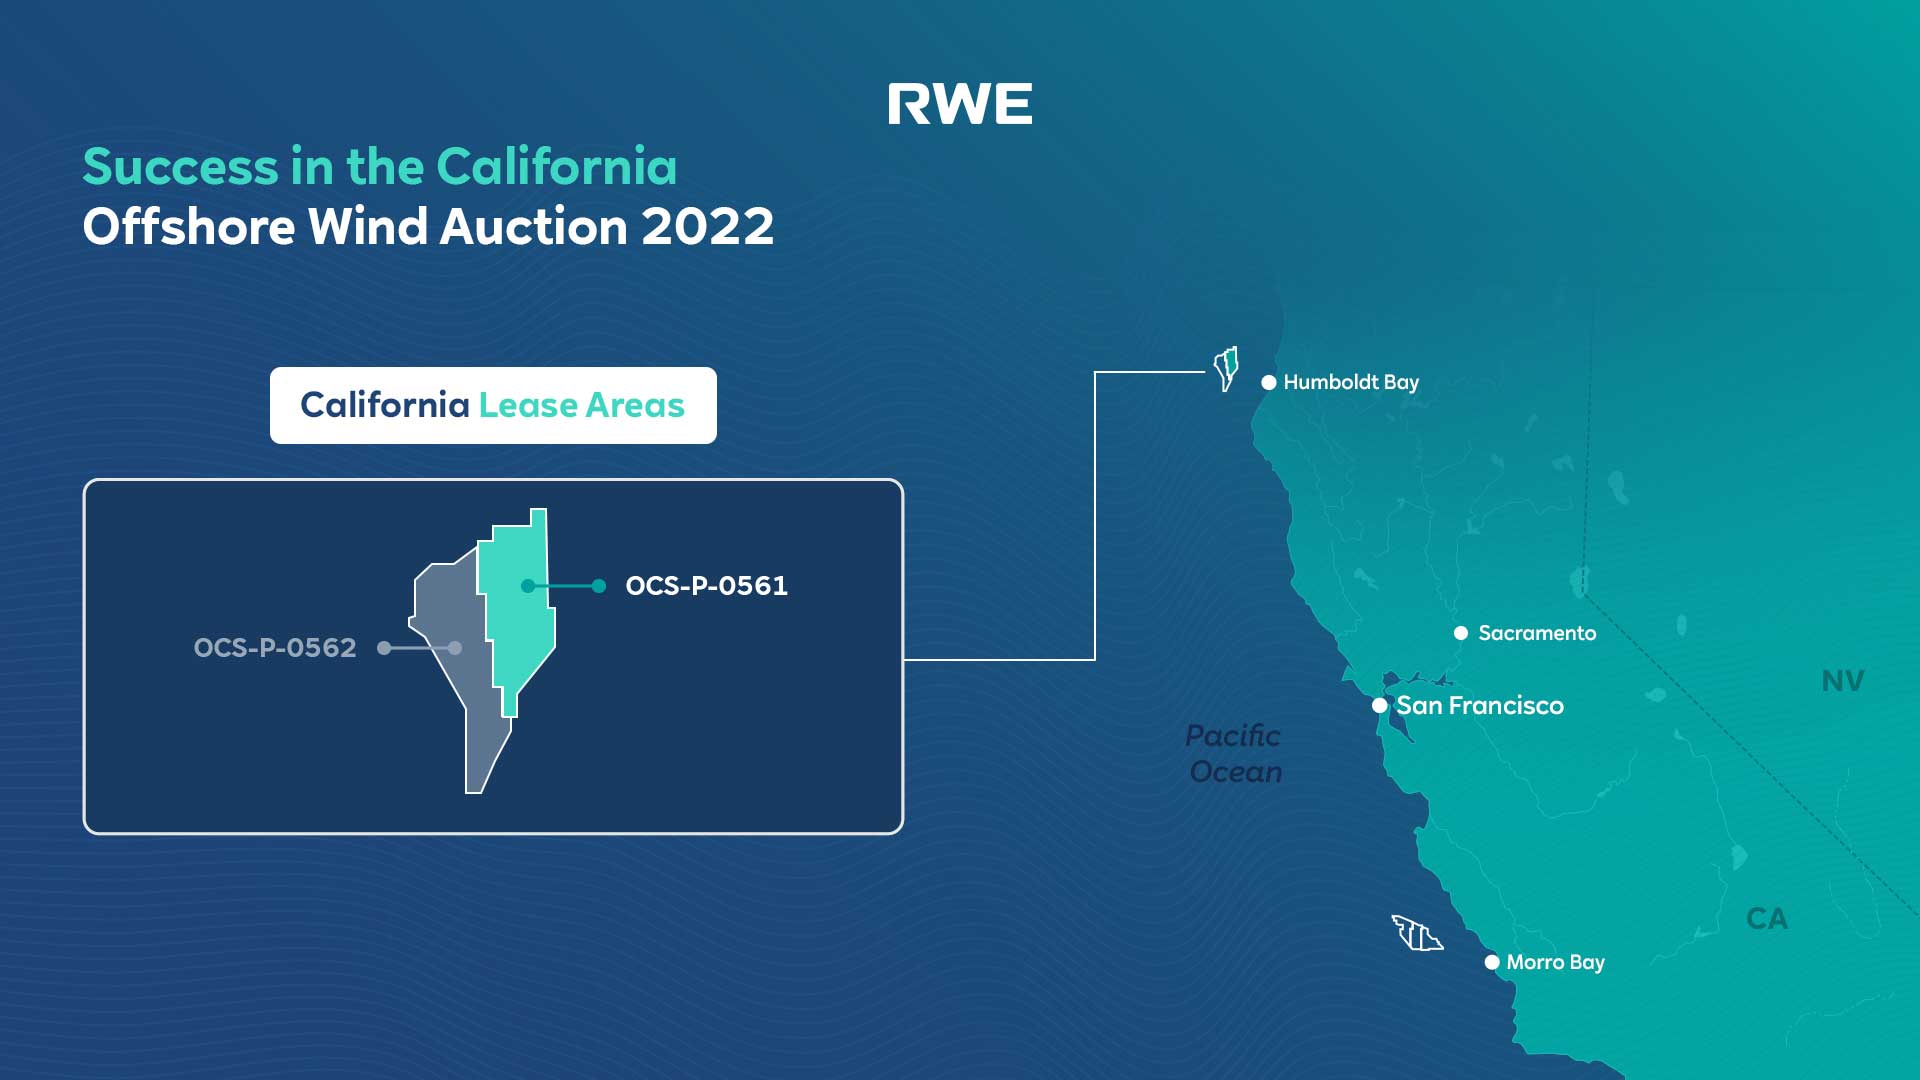 RWE Names Its US Floating Wind Project, Plans to Open California